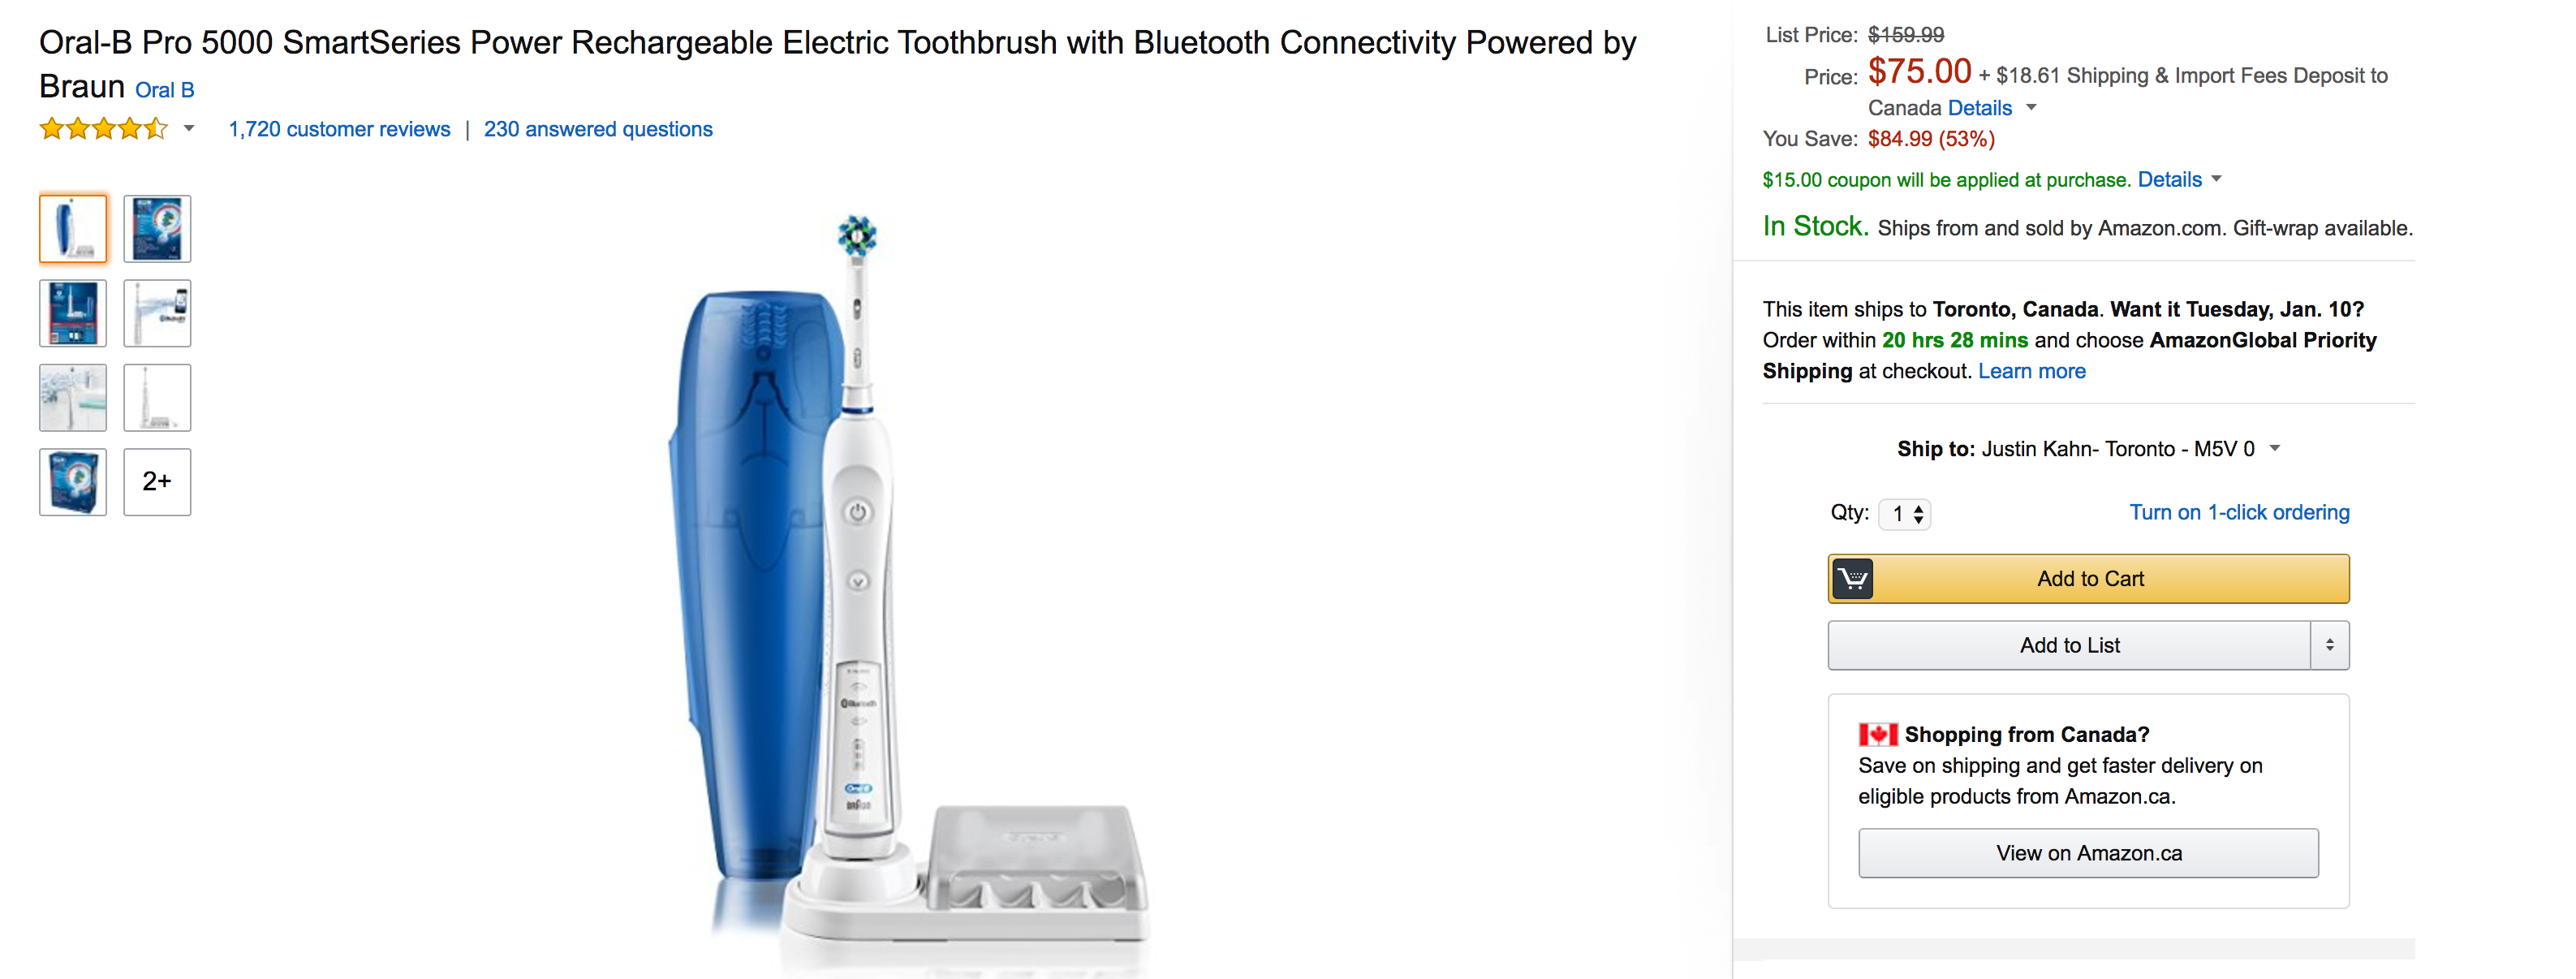 oral-b-pro-5000-smartseries-power-rechargeable-electric-toothbrush-3